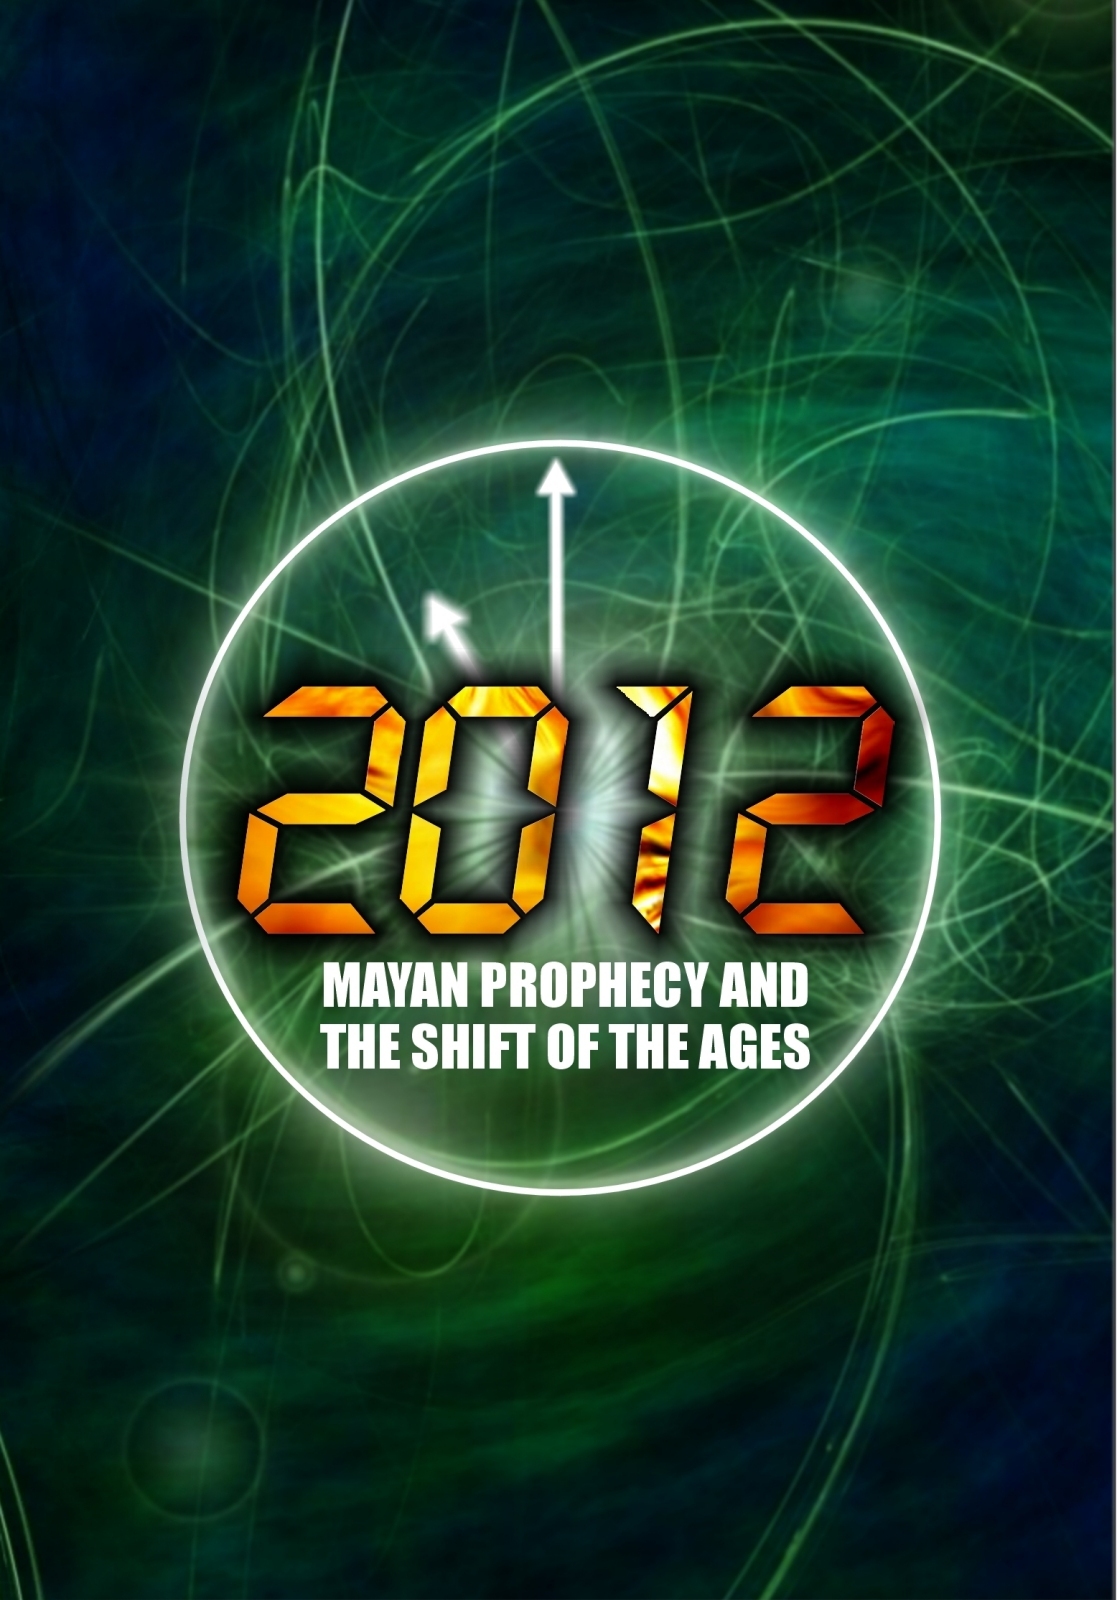 2012: Mayan Prophecy and the Shift of the Ages (2009) Screenshot 1 